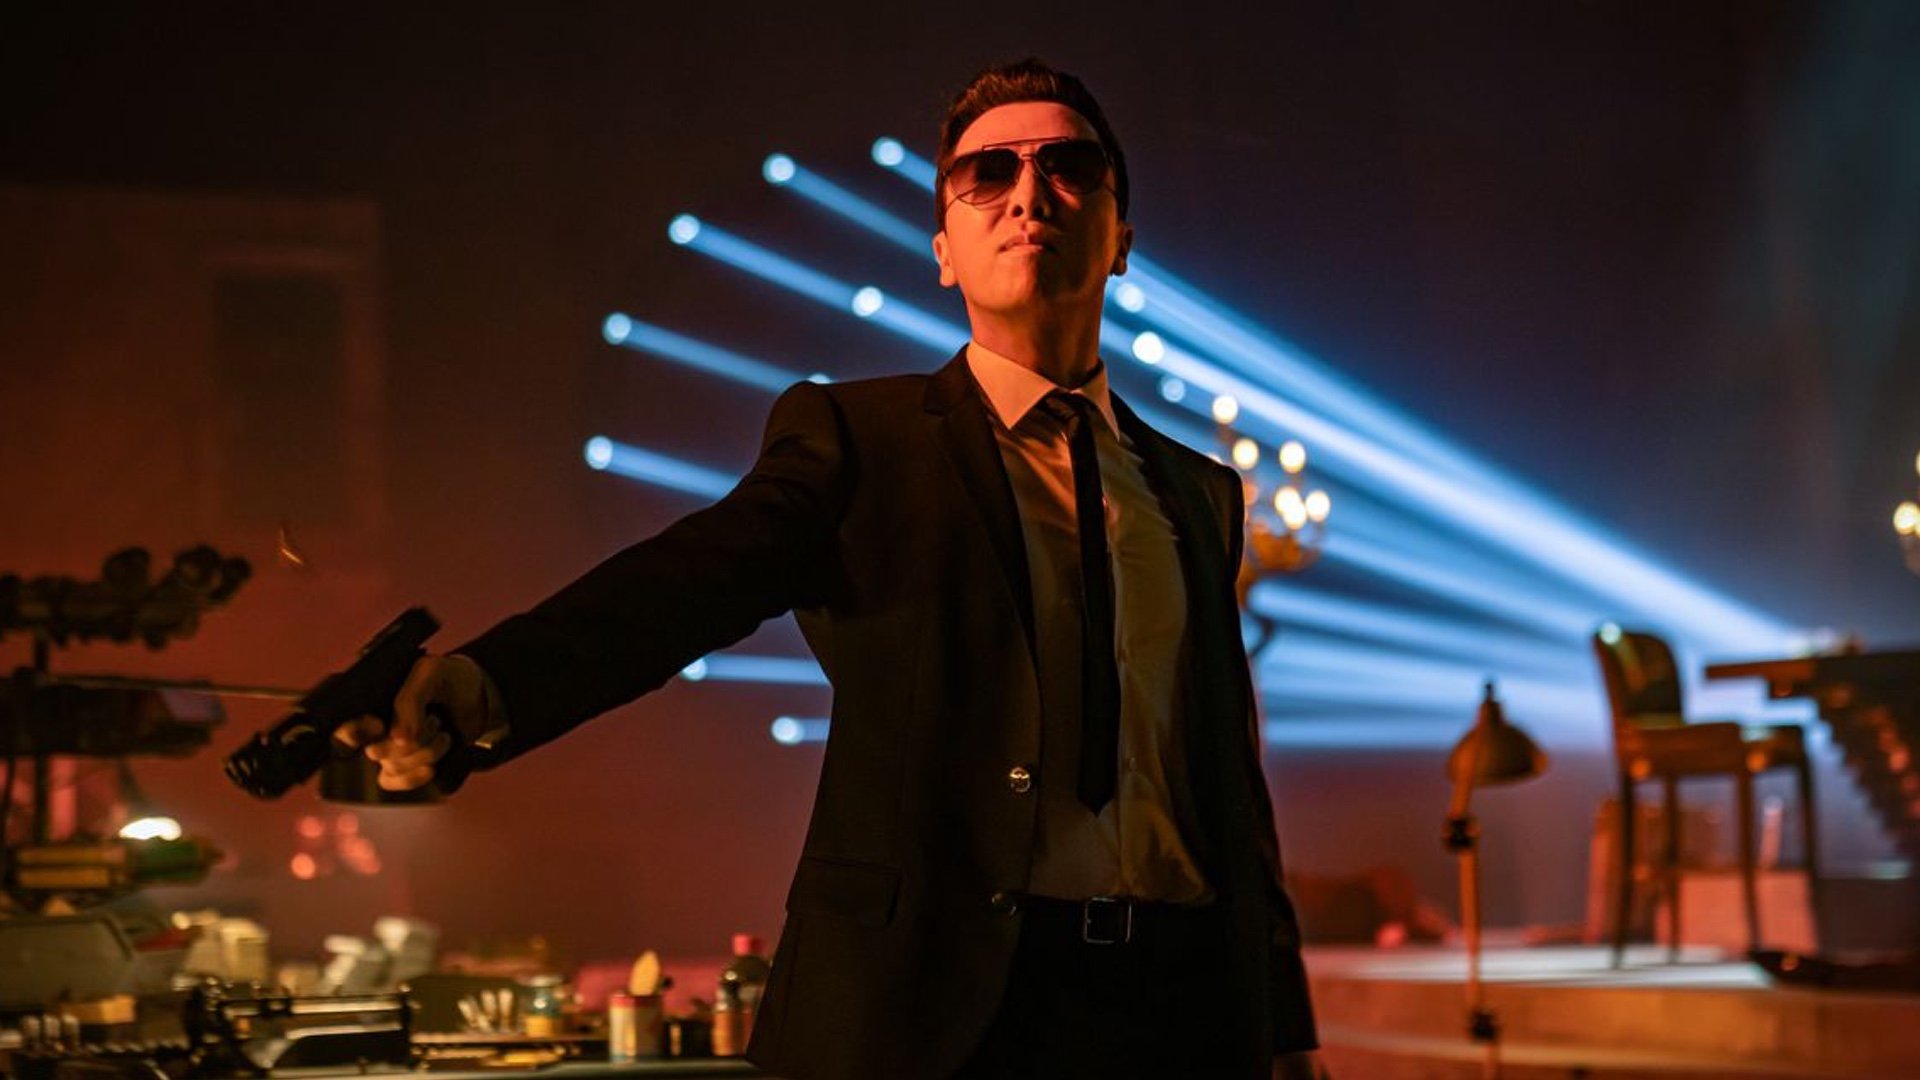 Donnie Yen Gets His Own John Wick Spin-Off Movie!